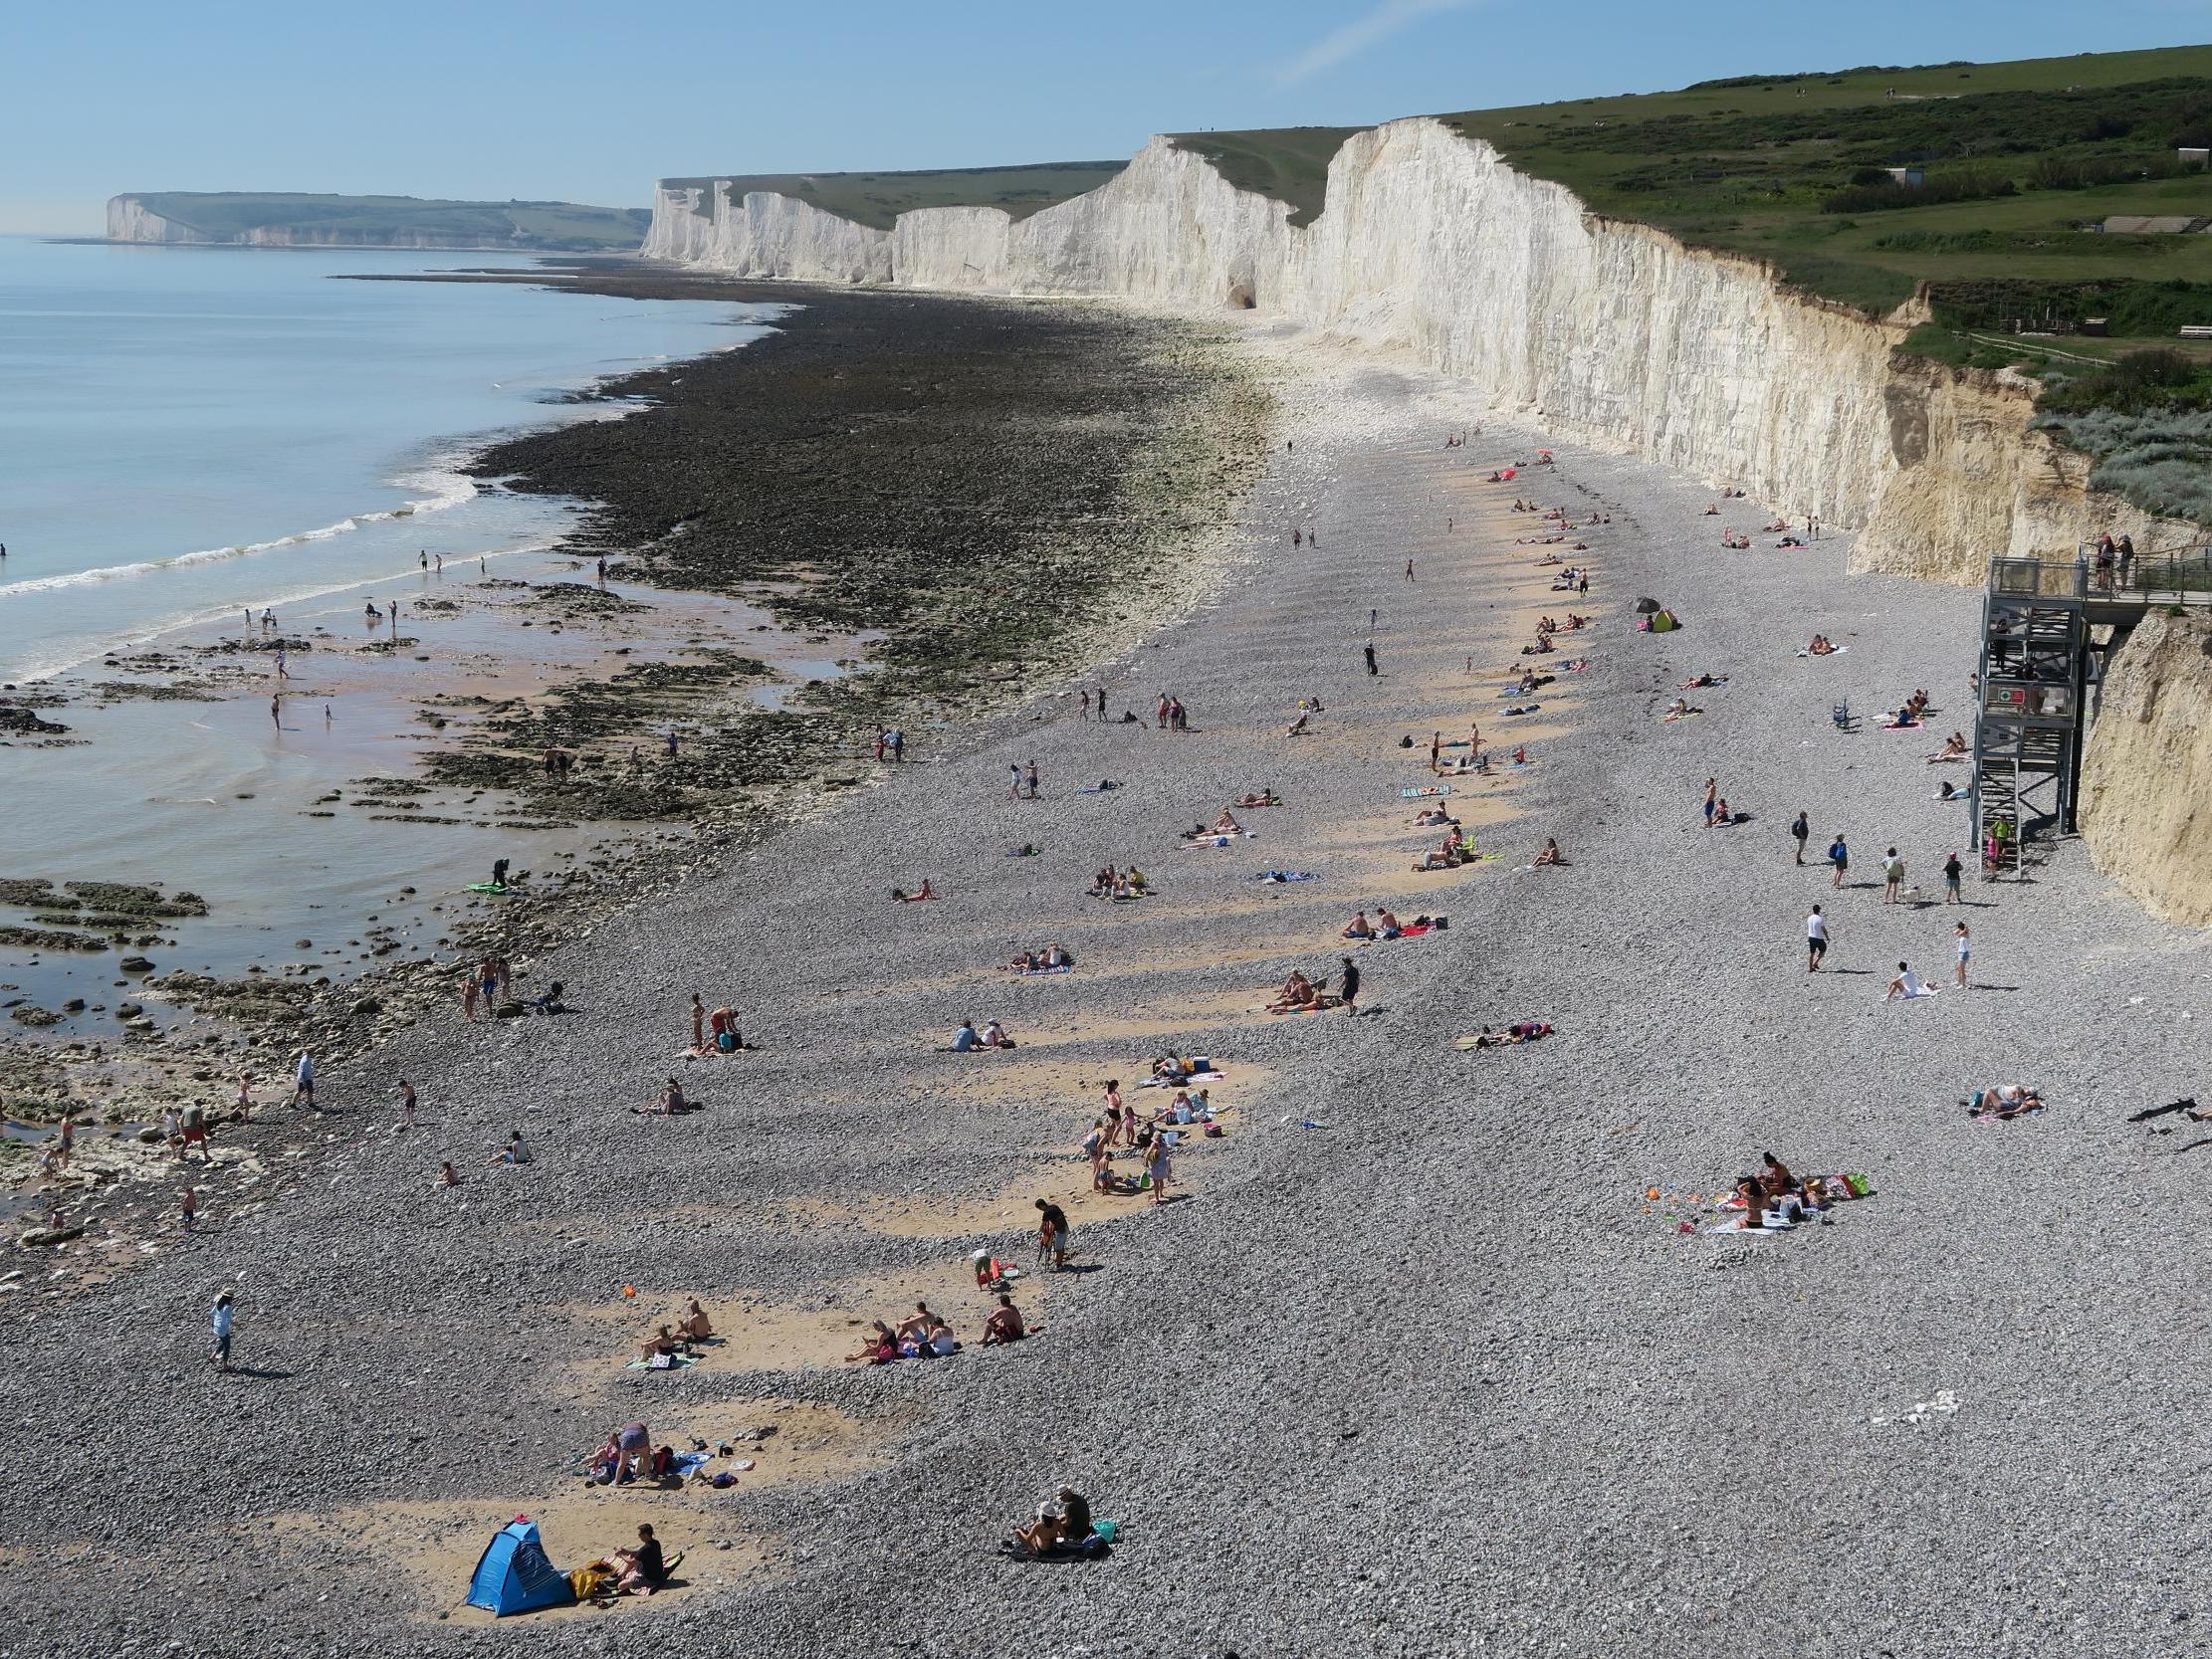 People enjoy the good weather on a beach near Eastbourne, Sussex, on 20 May, 2020.